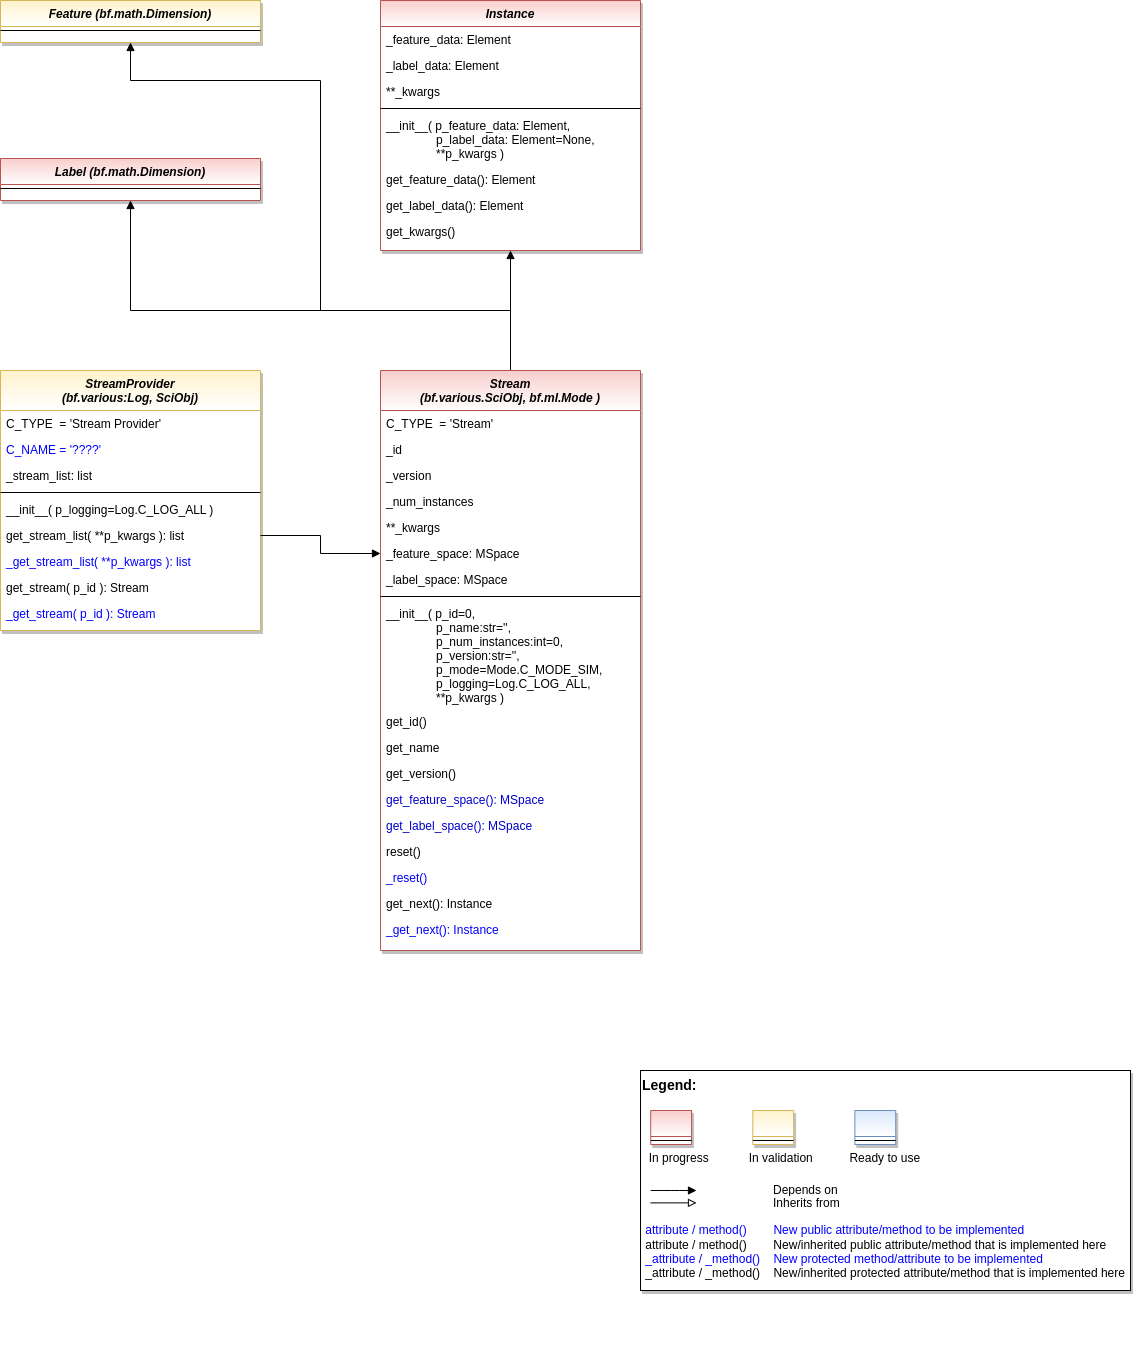 ../../../_images/MLPro-OA-Streams_class_diagram.drawio.png